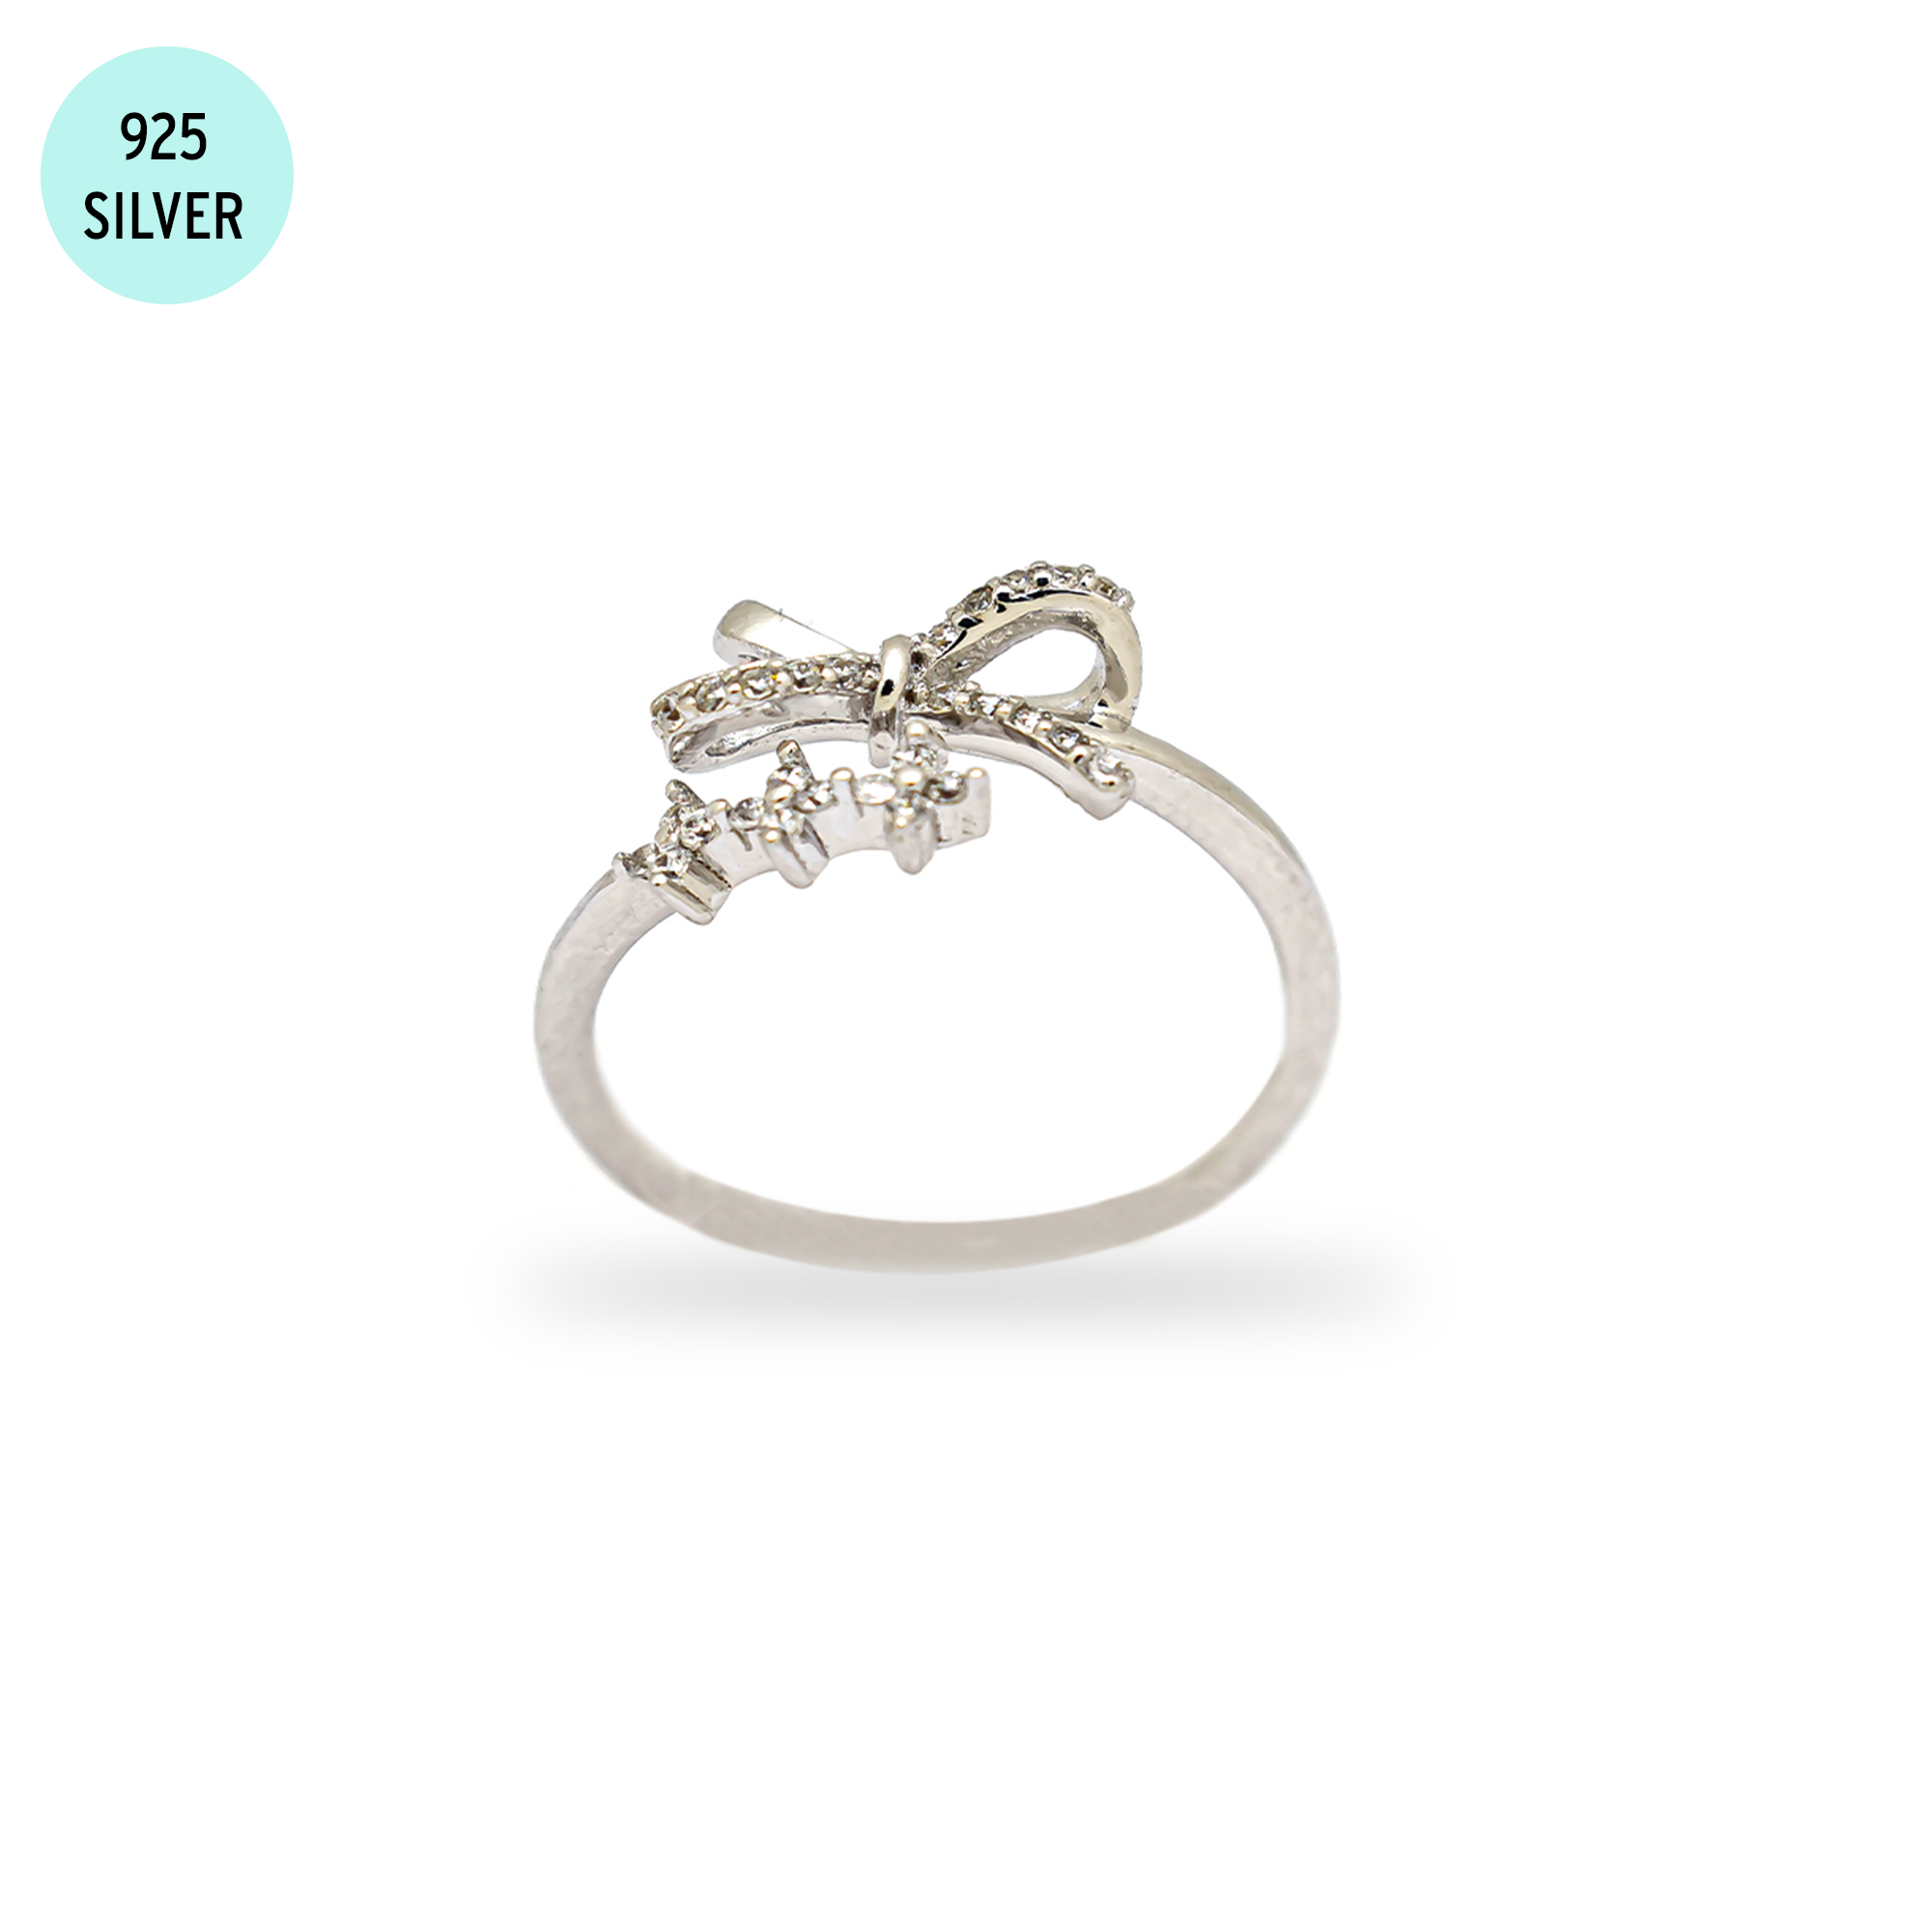 Bowtie 925 Sterling Silver Adjustable Ring